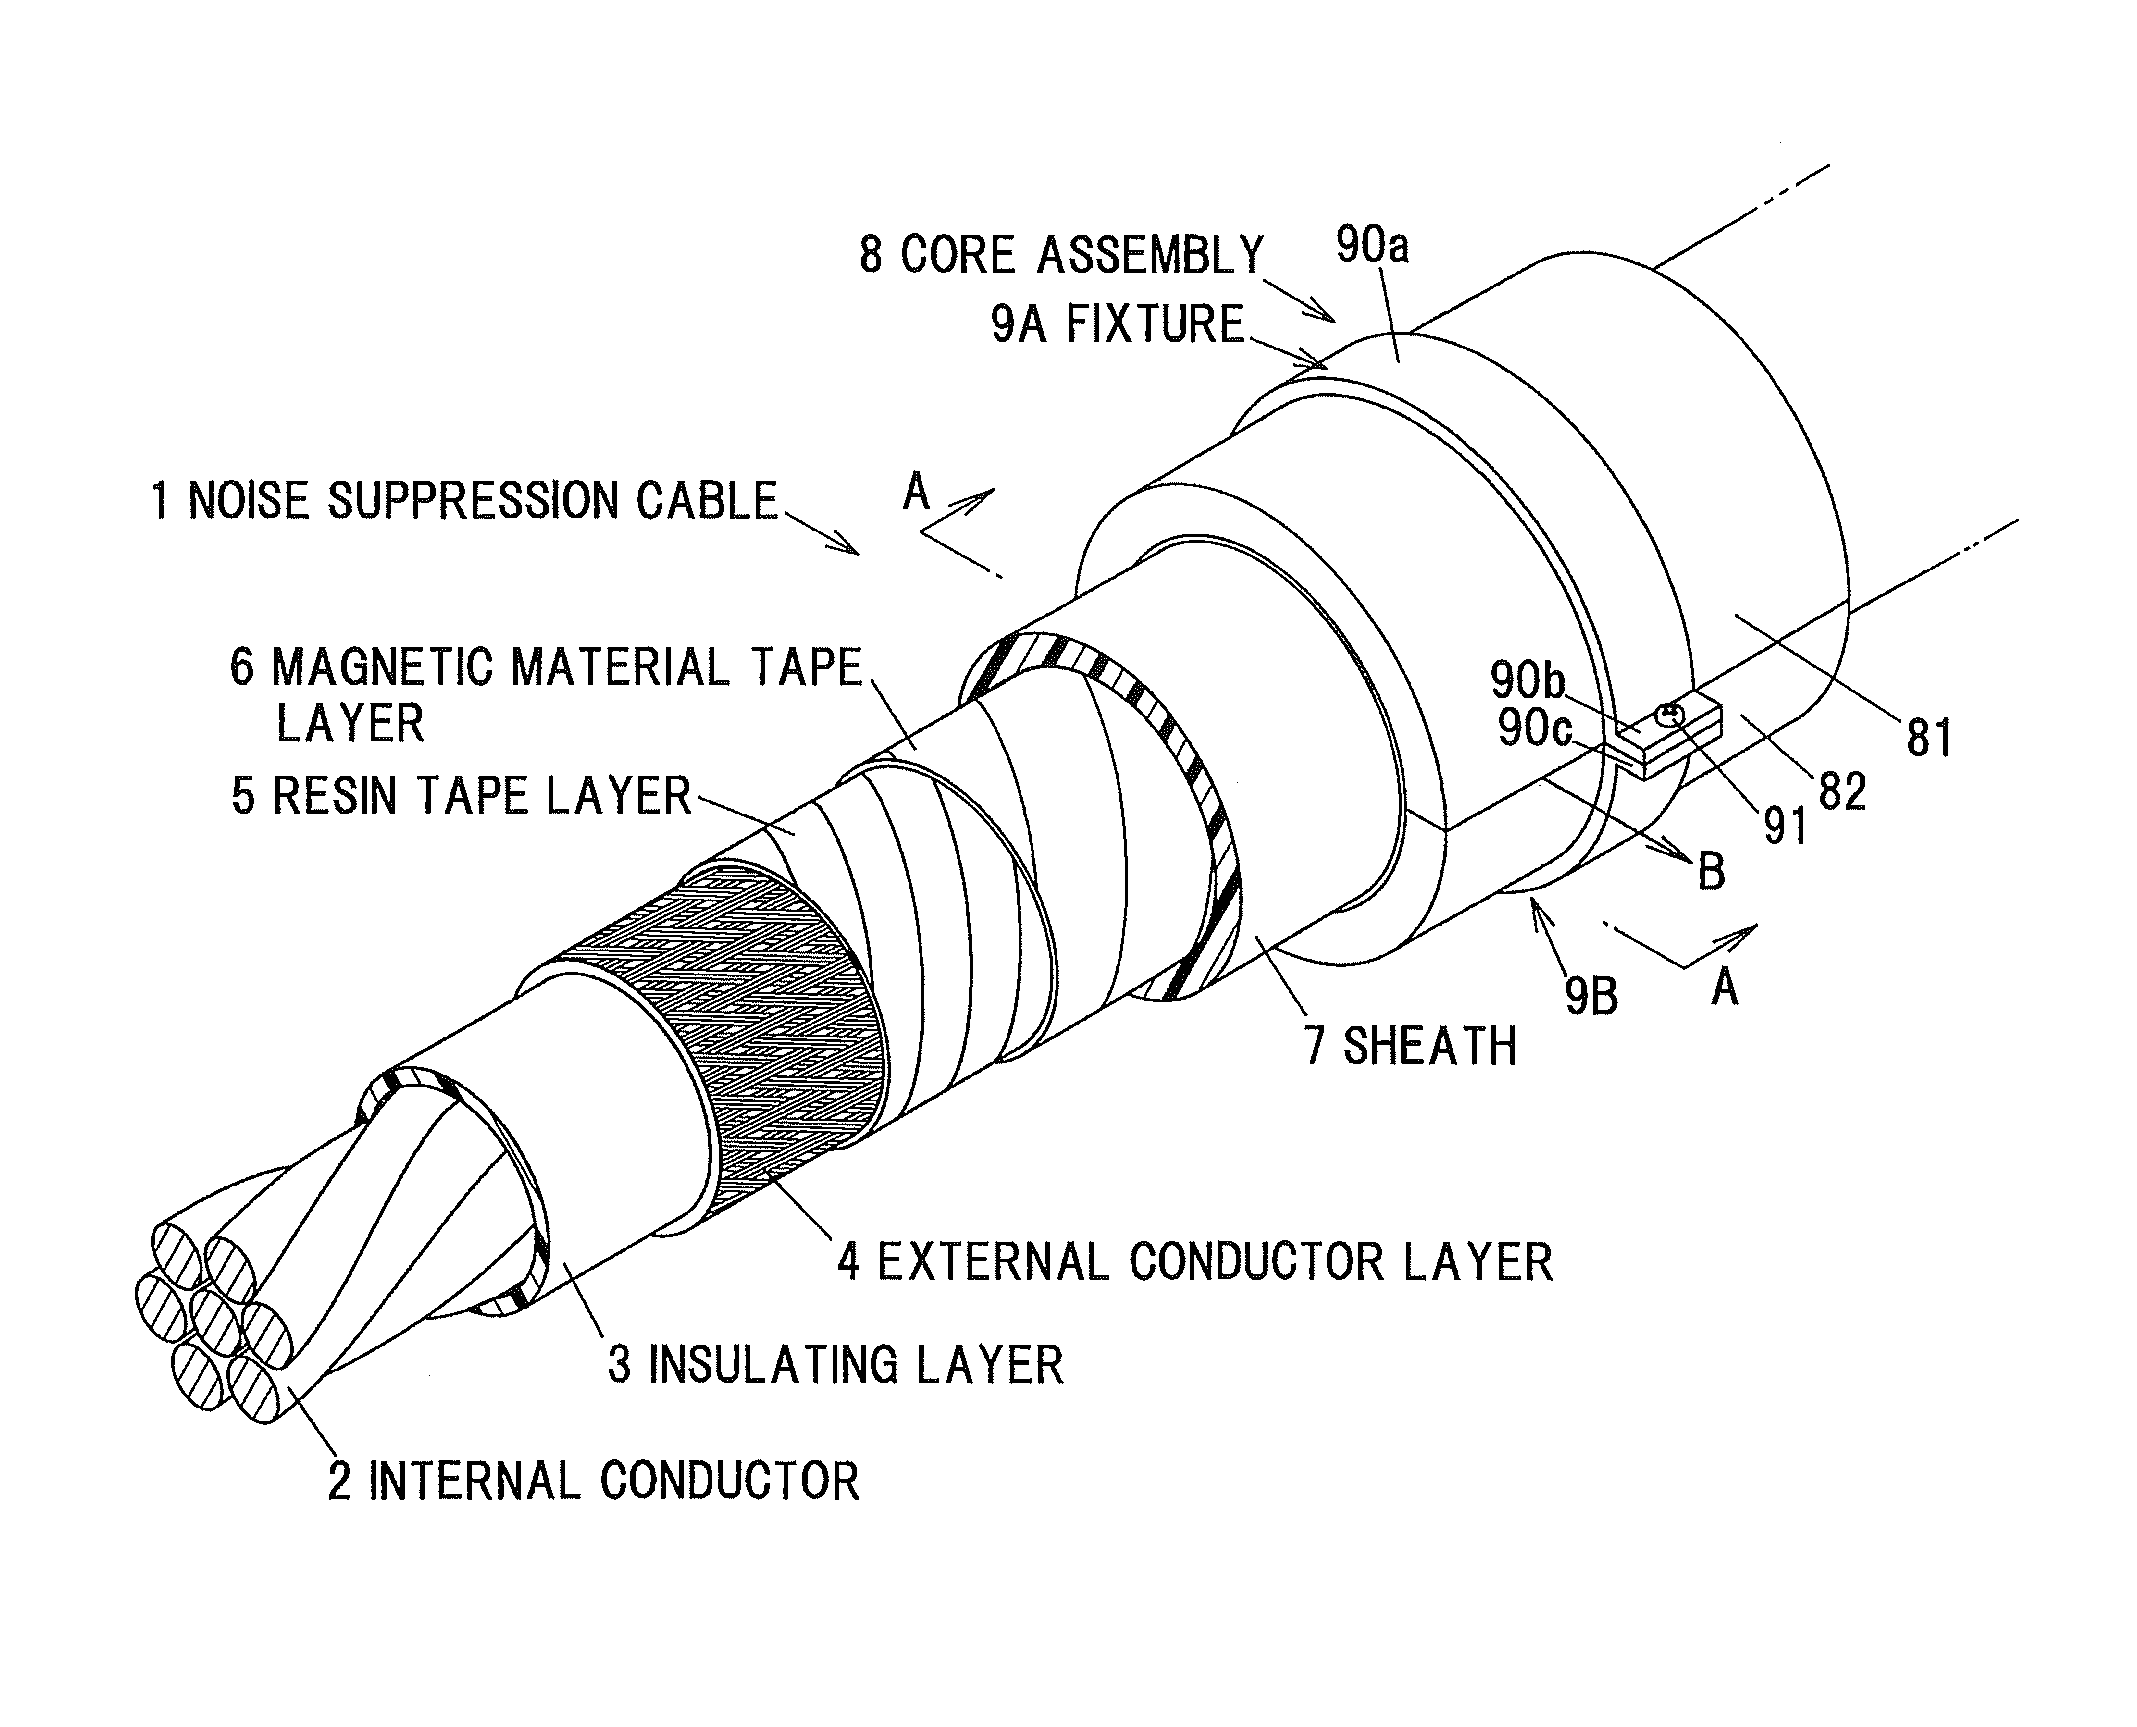 Noise suppression cable, core assembly, and electrical device